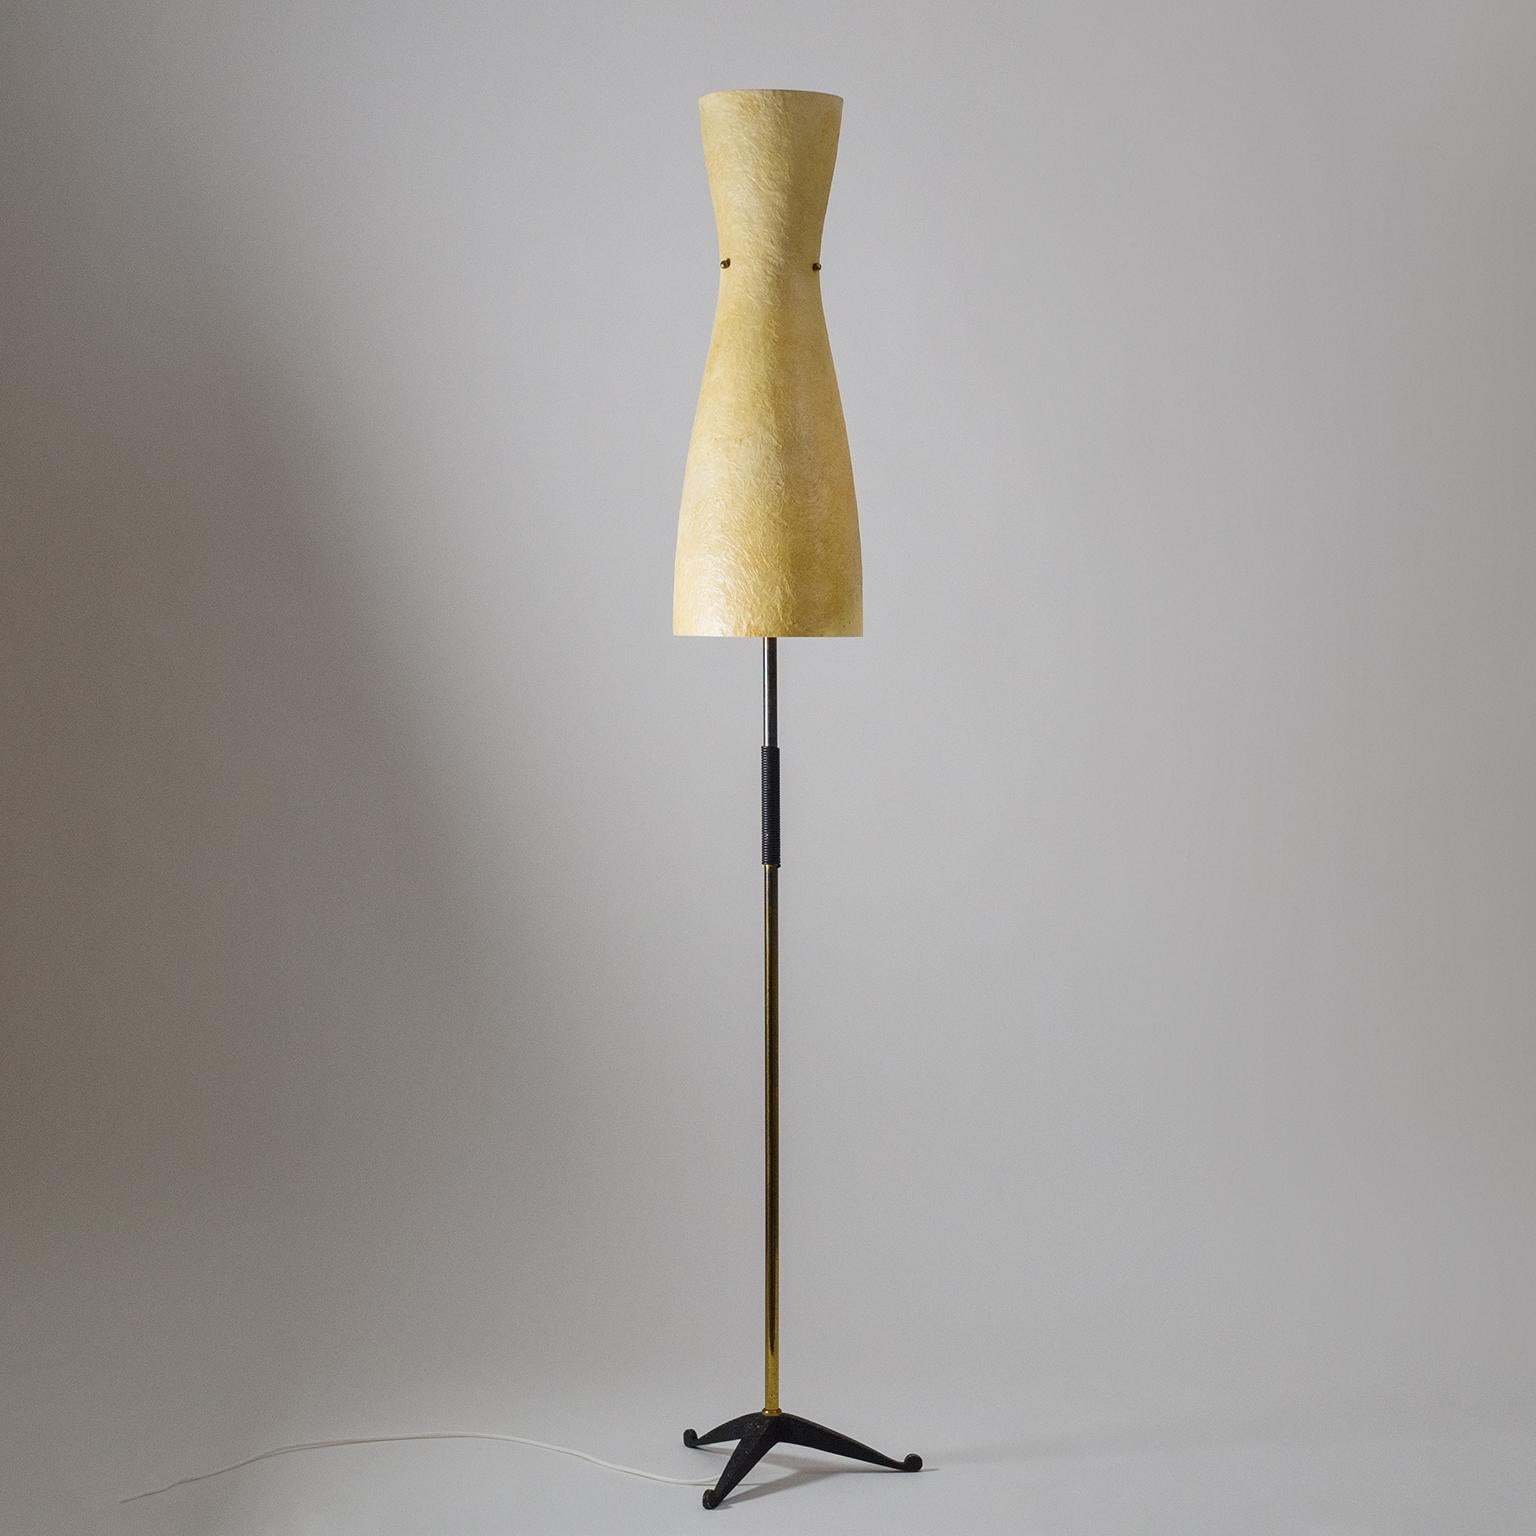 Wonderful 1950s standard lamp with a large fiberglass shade, brass stem with black nylon cord grip and cast iron tripod base. Very Fine midcentury design combining Stark modernist elements with organic shapes and surfaces. Three original brass E27